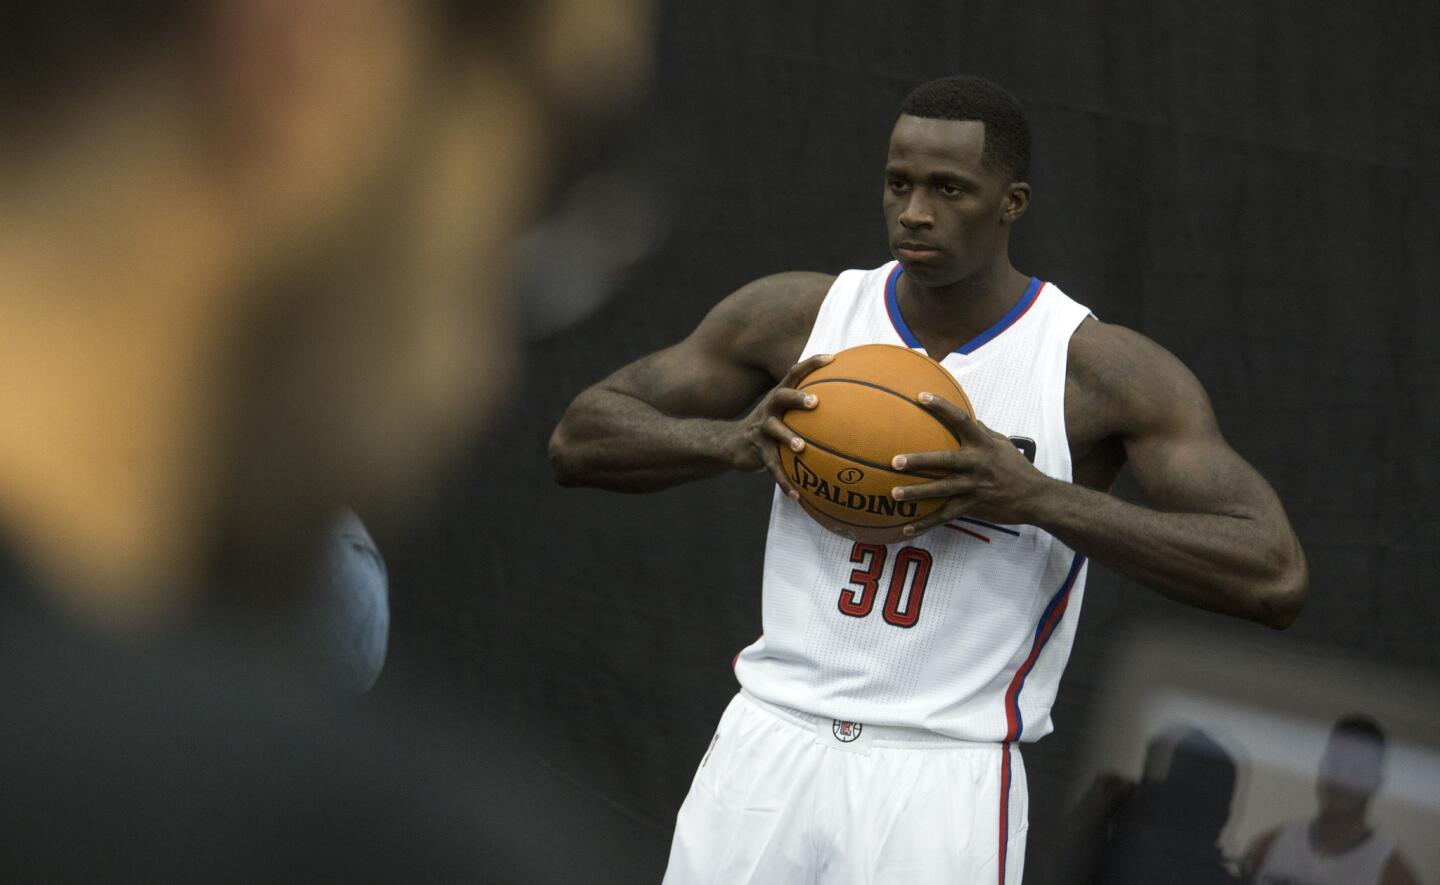 Clippers forward Brandon Bass poses for photos at the Clippers media day.